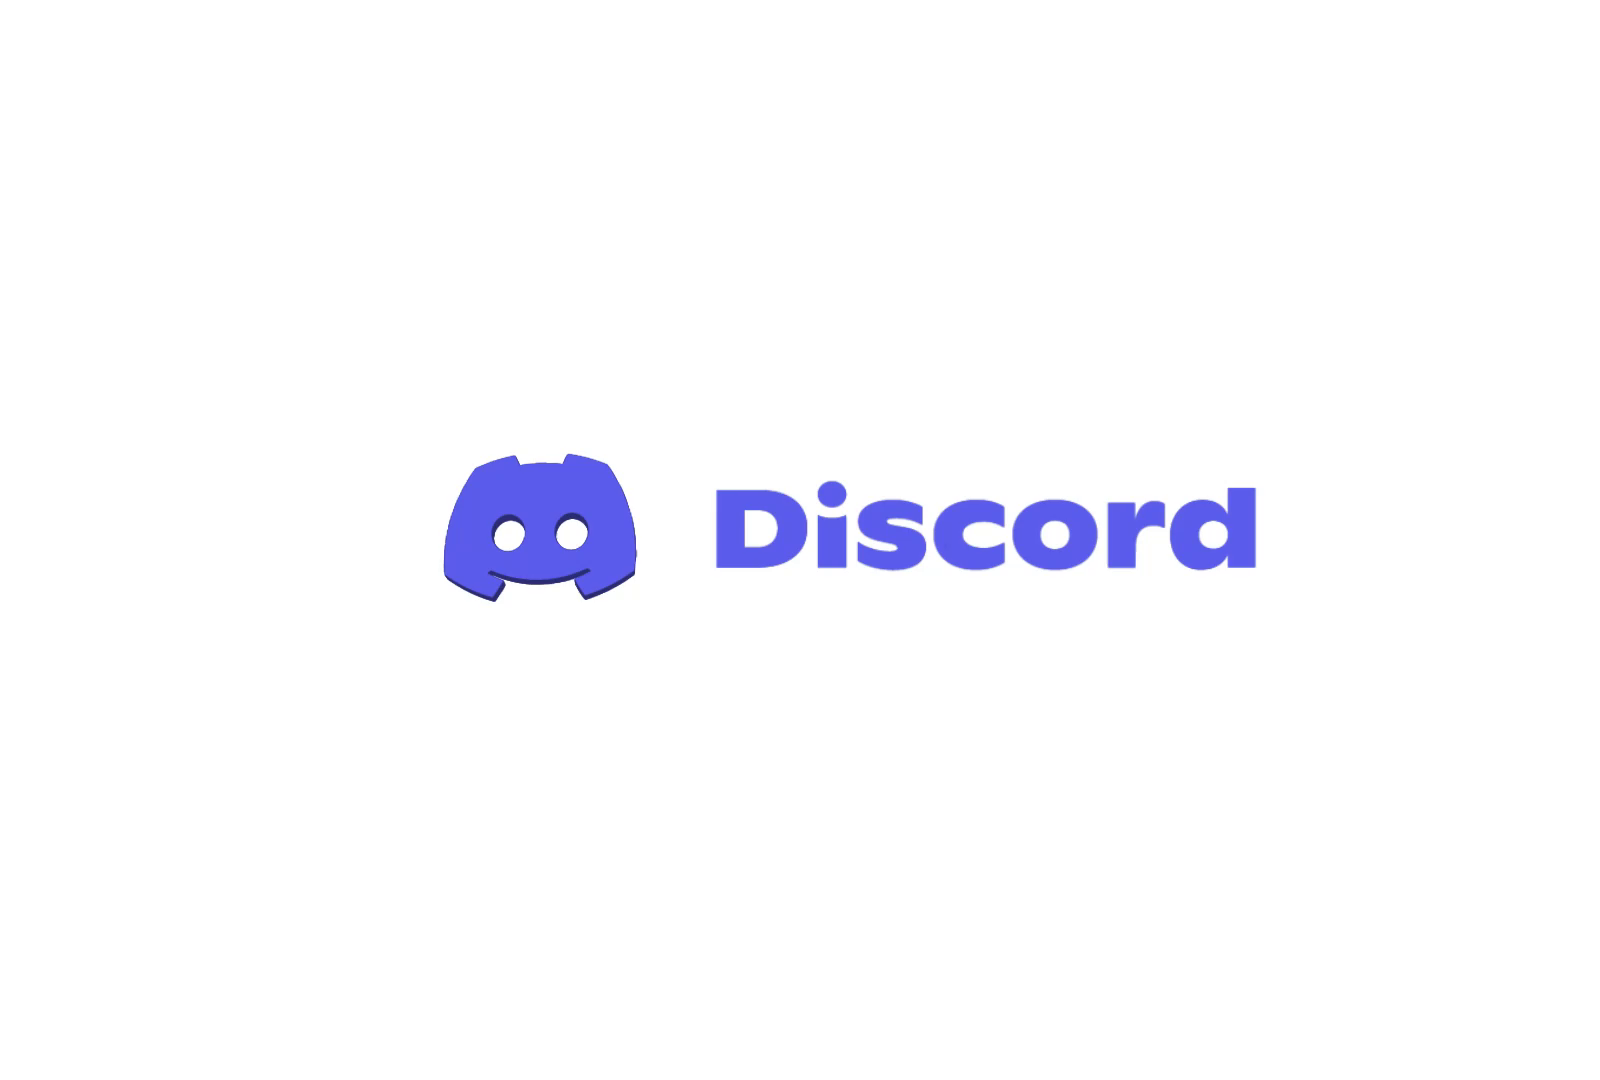 Logo Animation for Discord by Alexandre Garcia on Dribbble